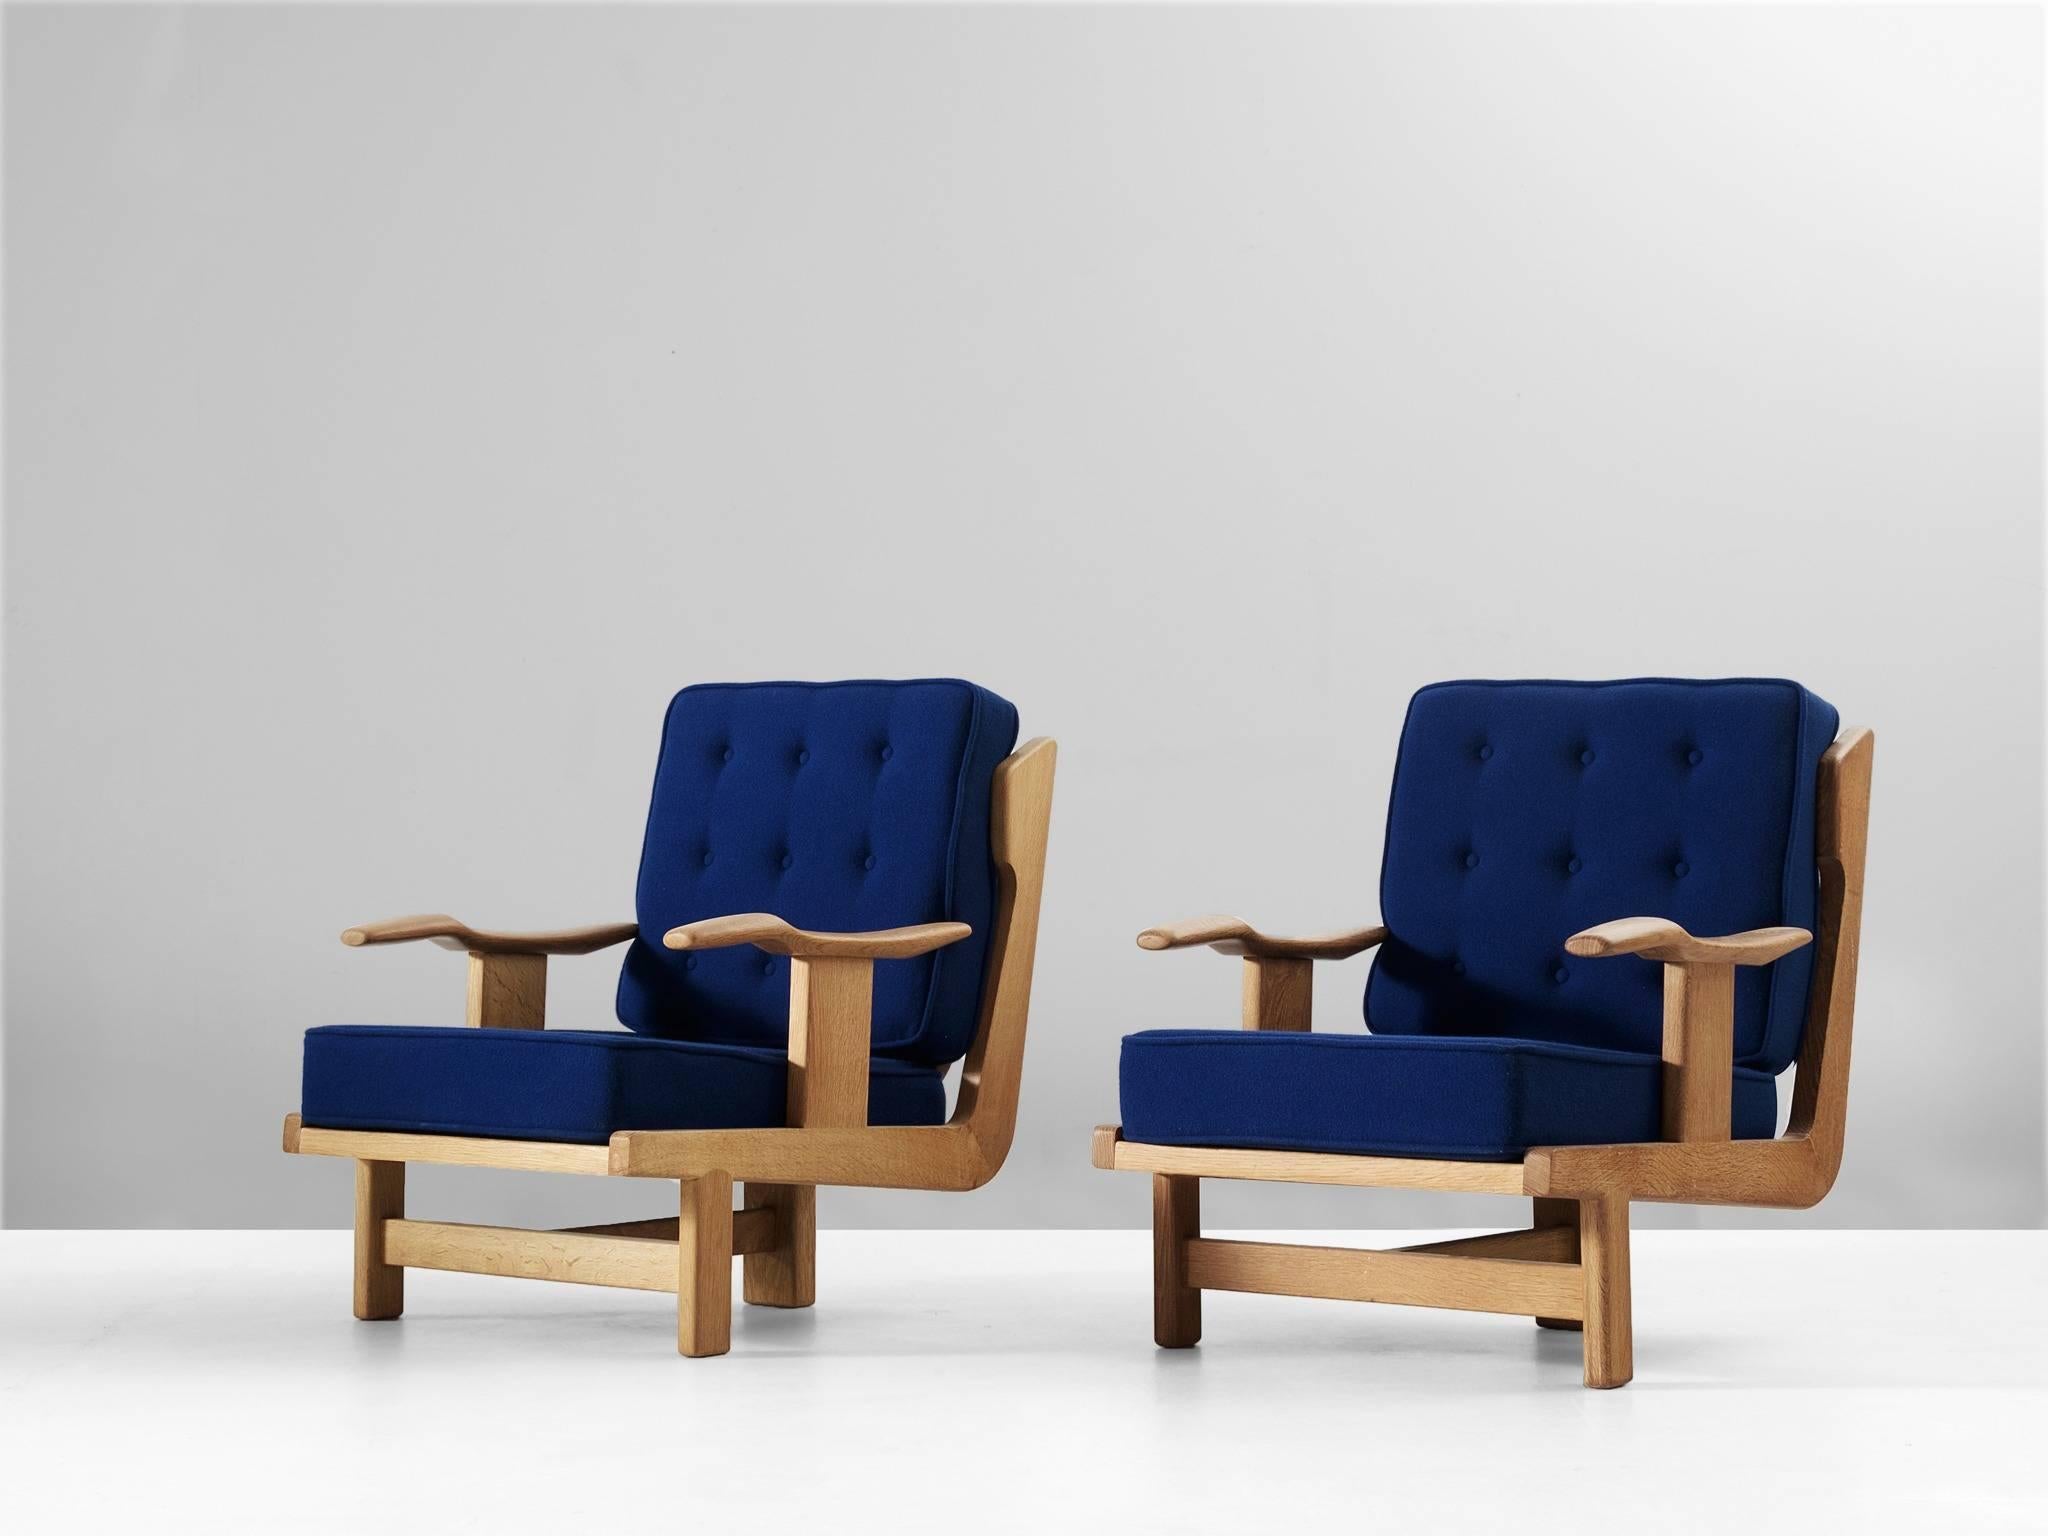 Lounge chairs, in oak and fabric, by Guillerme et Chambron, France, 1960s.

Sculptural pair of lounge chairs in solid oak. The frame of these chairs is highly detailed. The base consist of three legs, which emphasizes the back. The armrest are